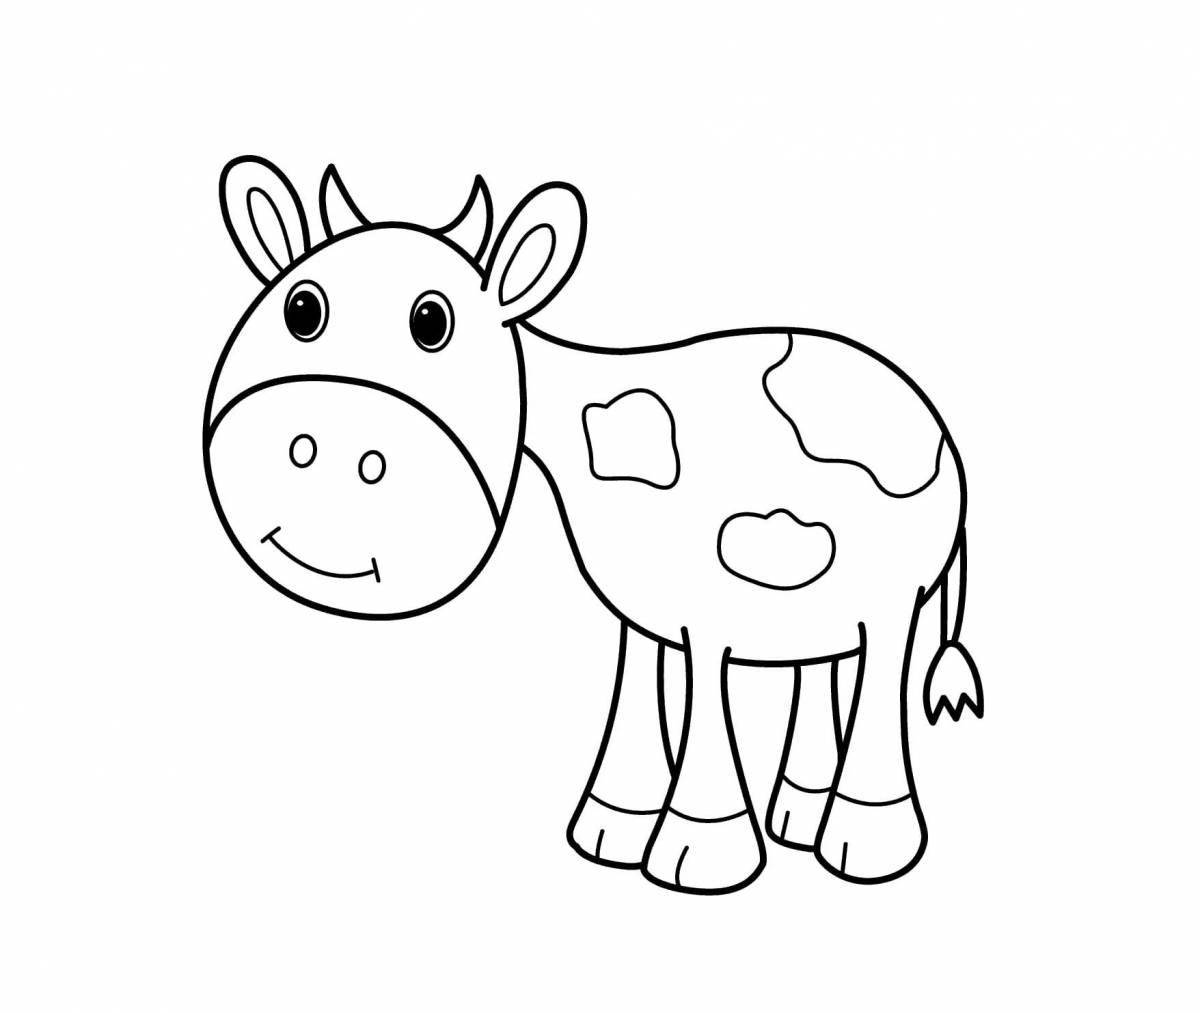 Colouring bright cow for children 3-4 years old